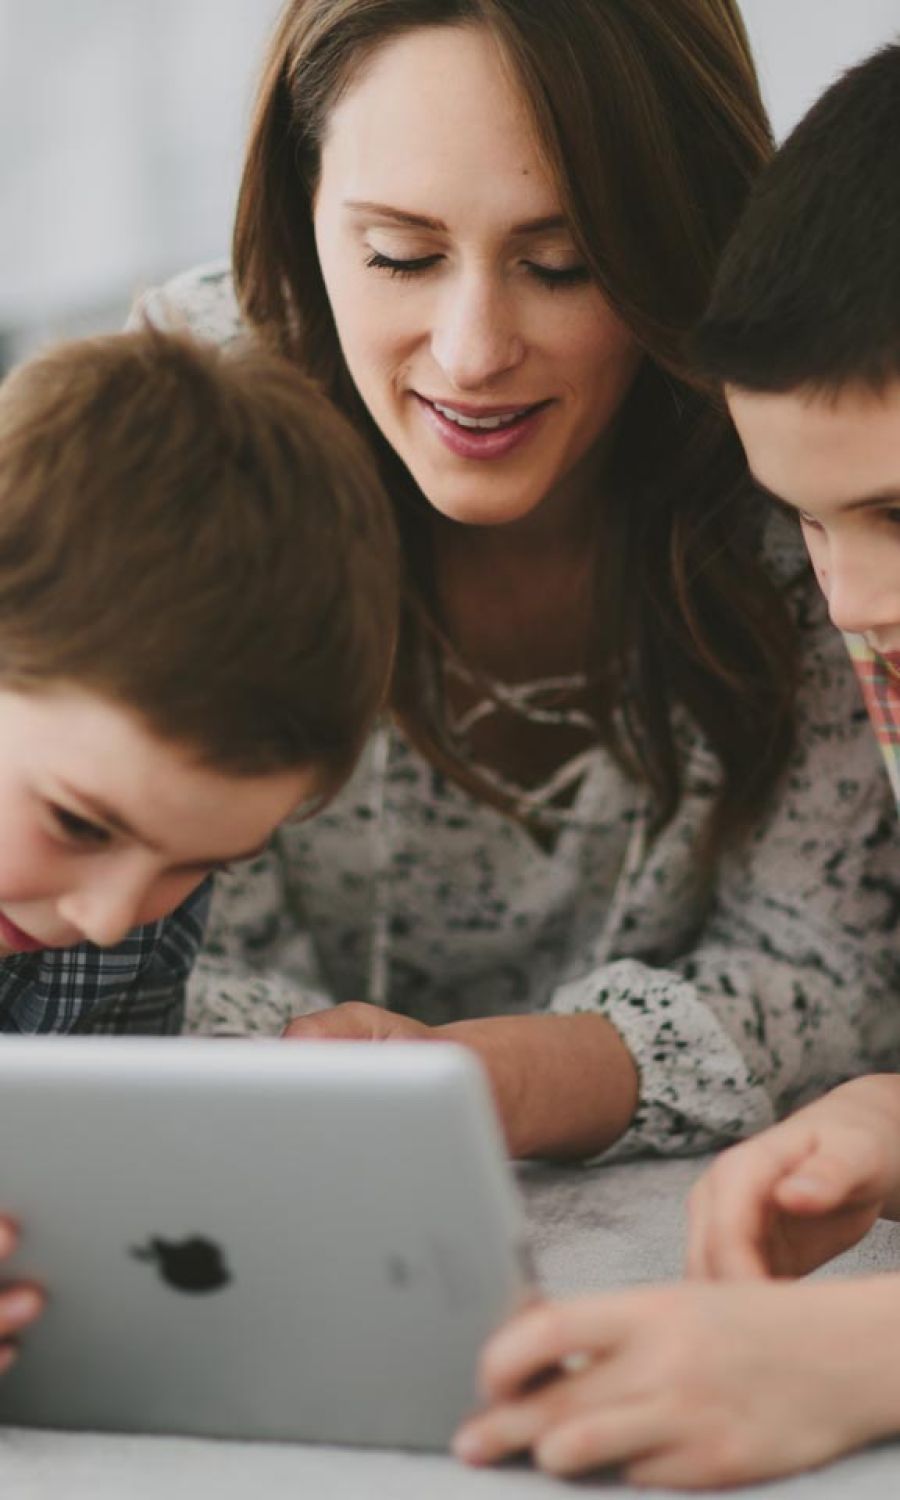 Woman and her kids looking at an ipad together